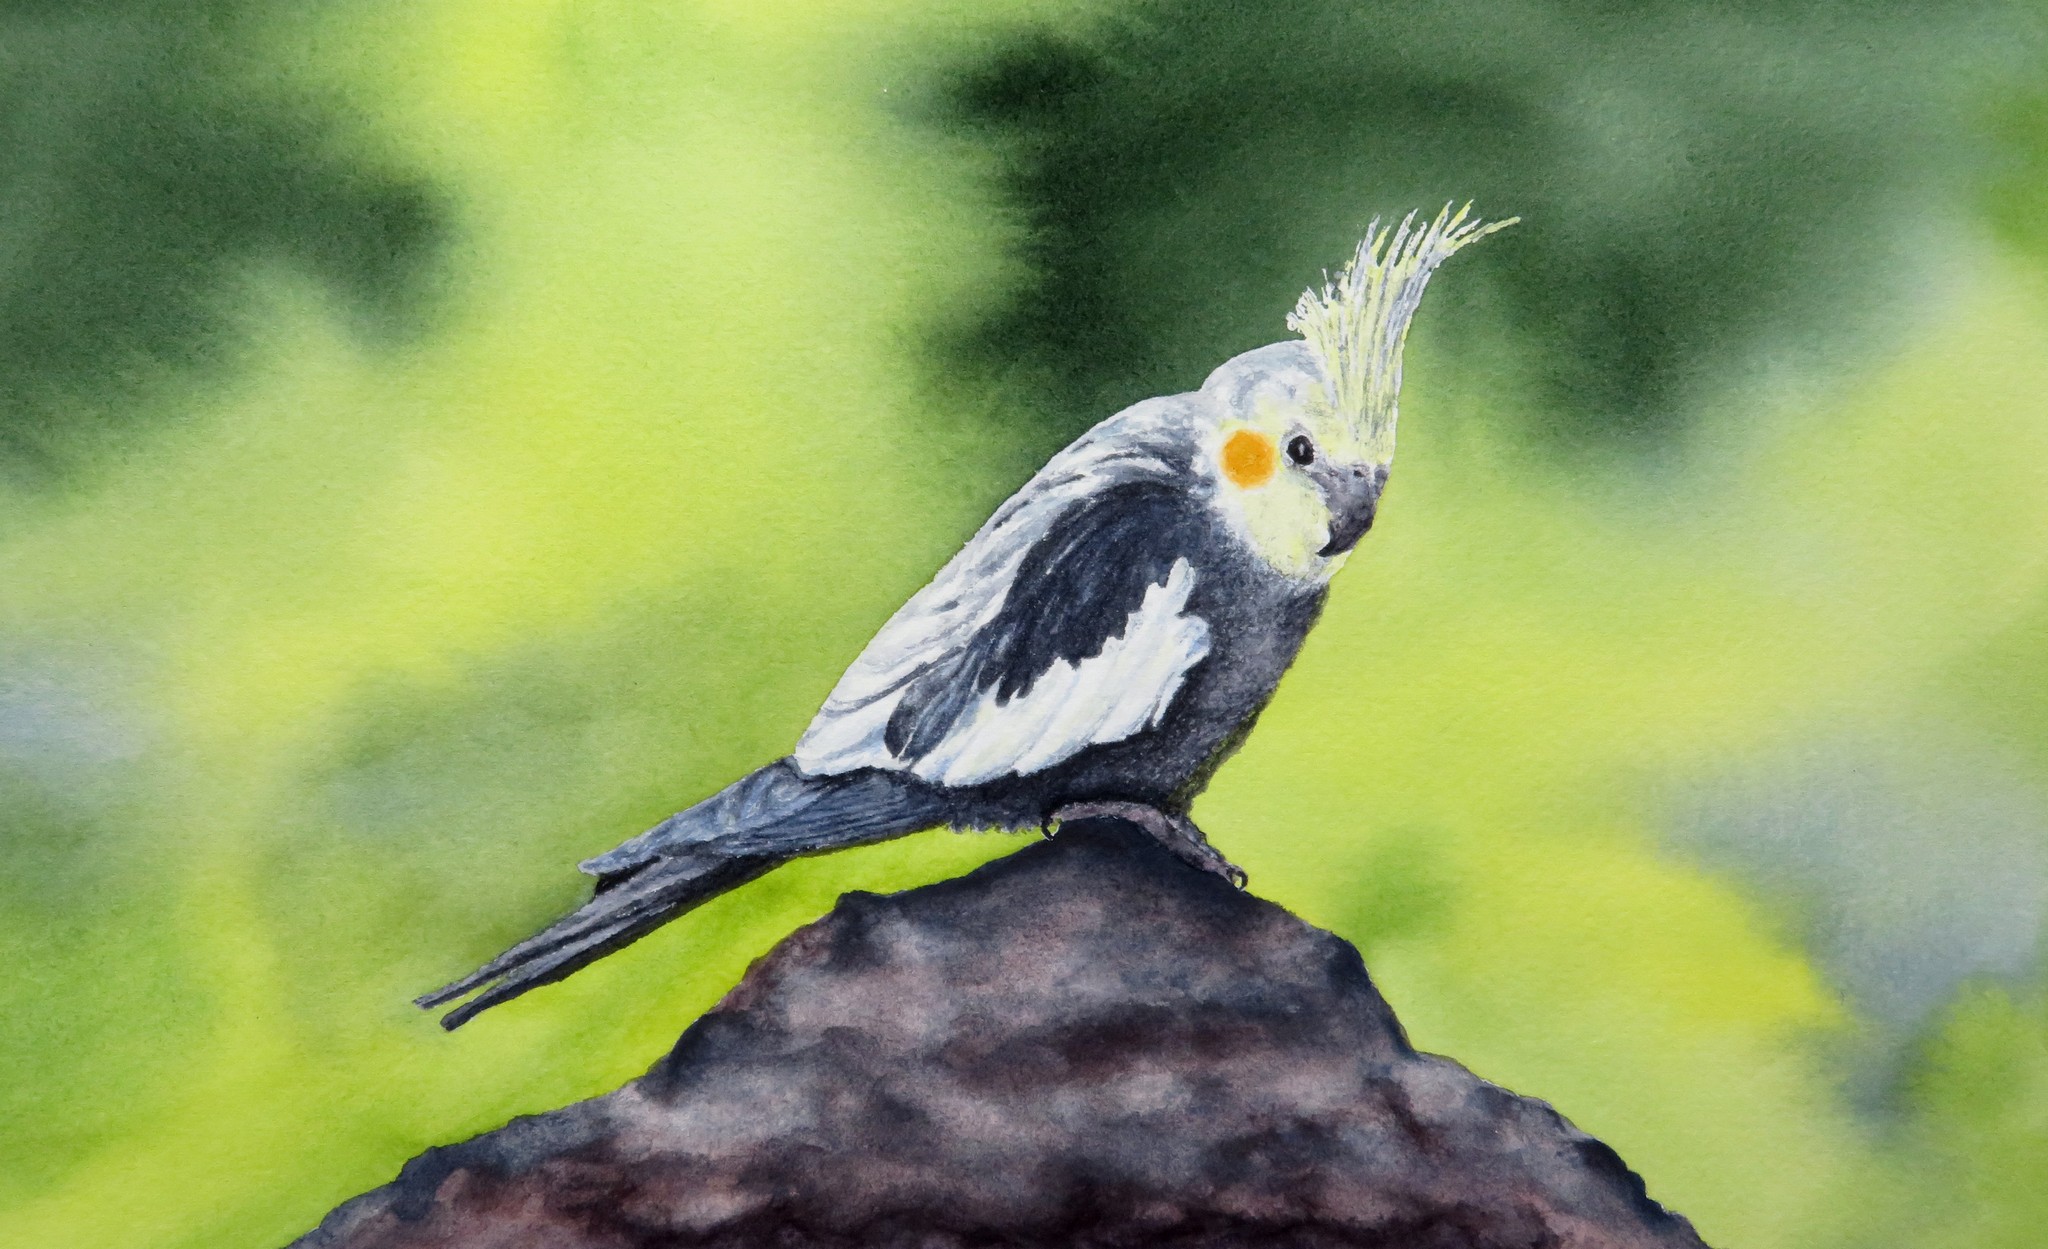 Watercolor painting of a bird by Art student